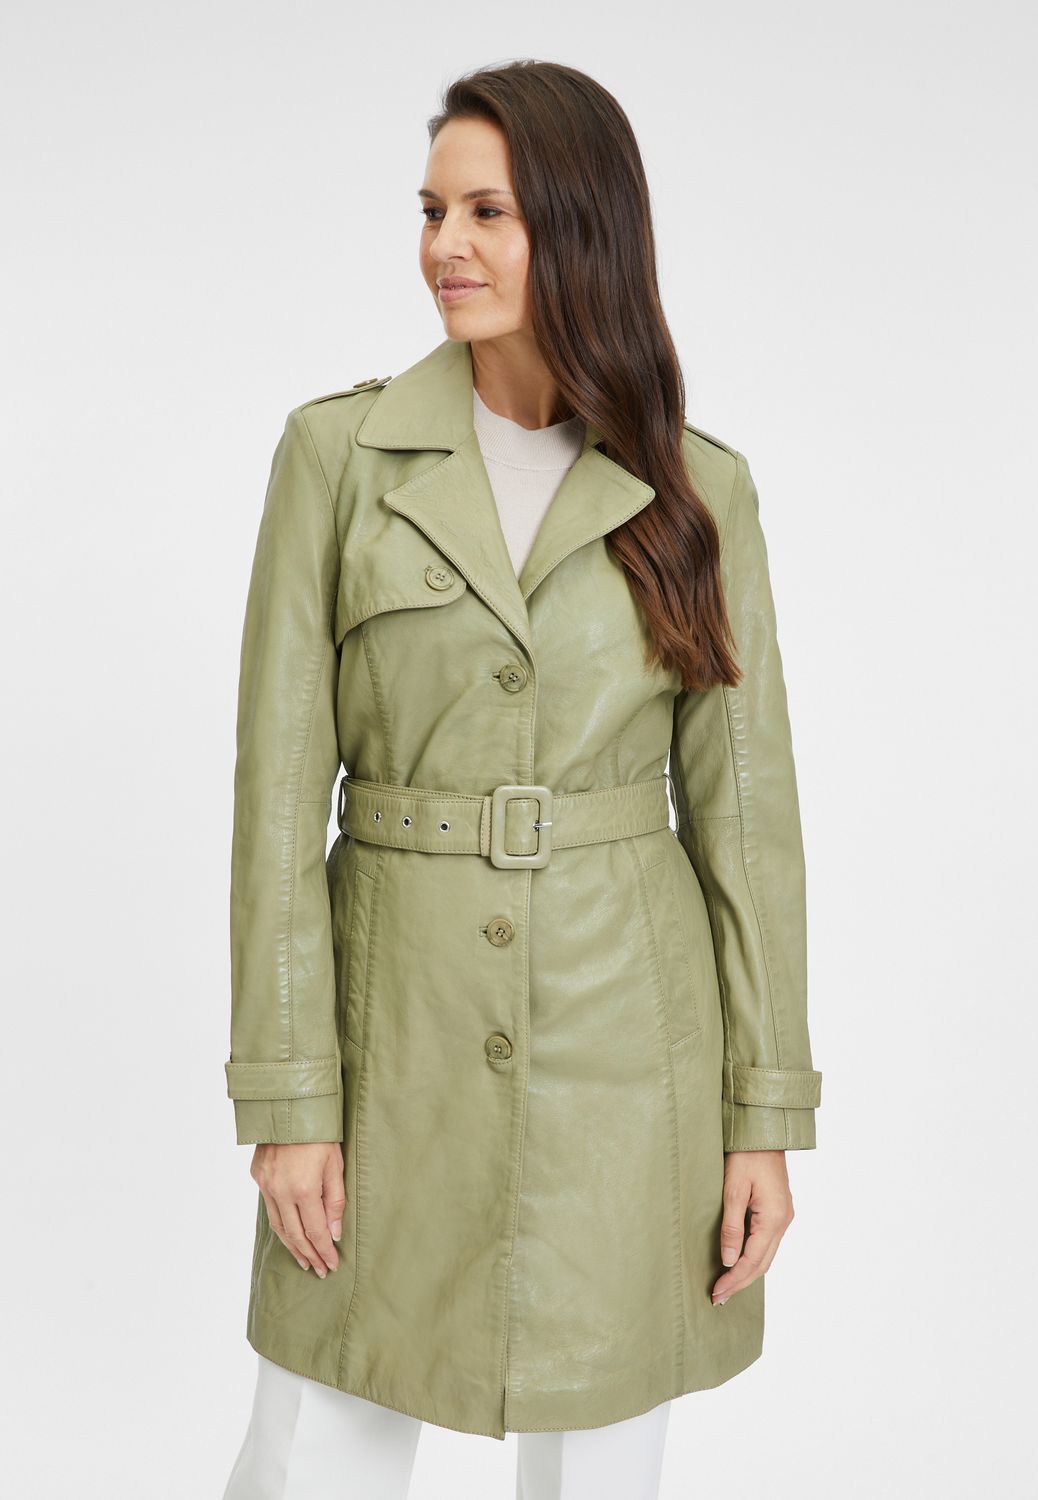 GWLaily S24 light olive